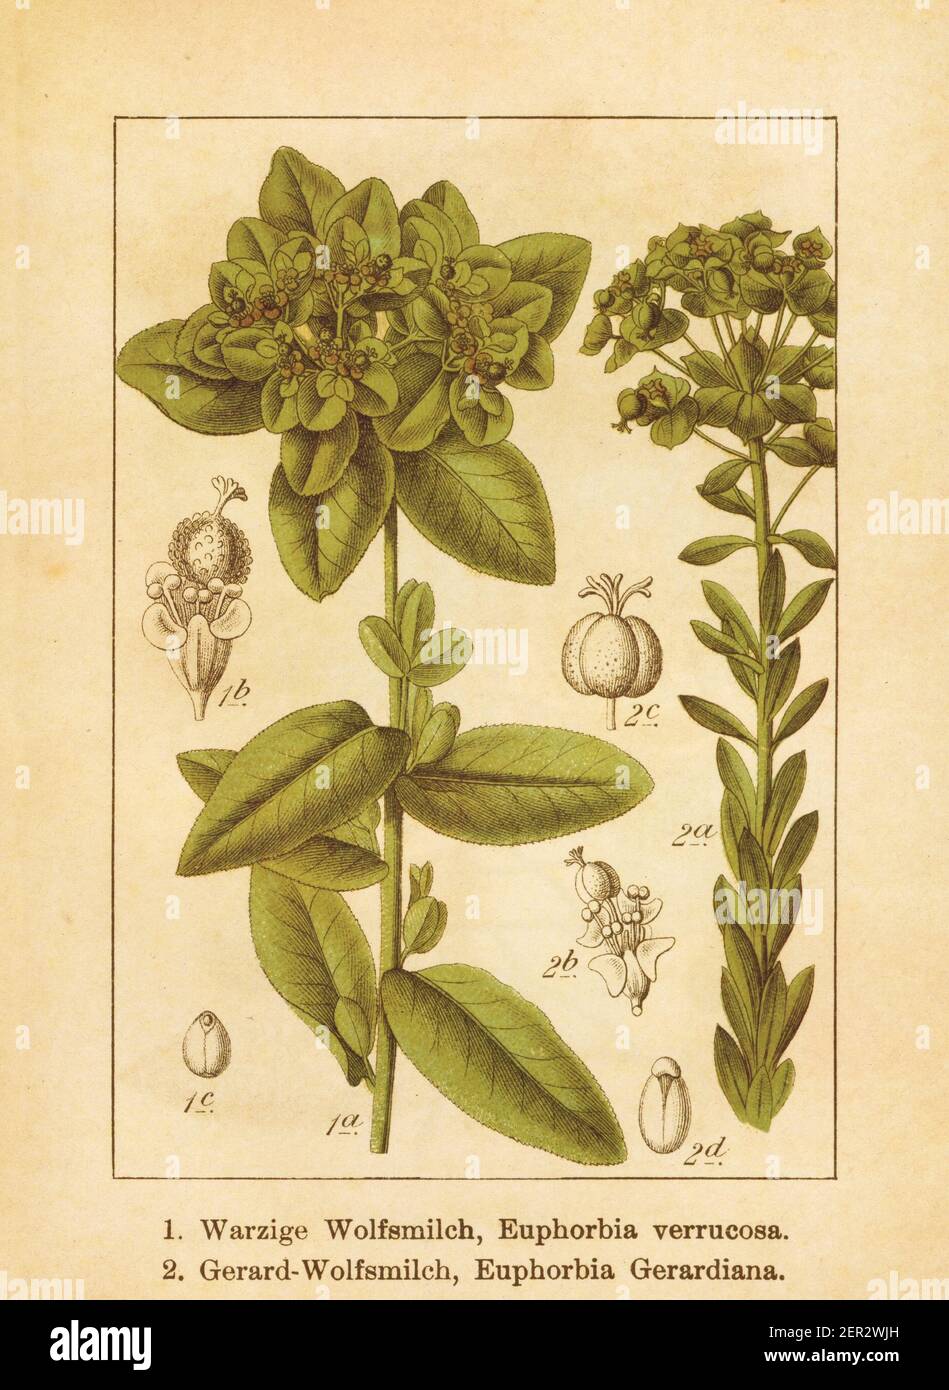 Antique illustration of an euphorbia verrucosa and euphorbia gerardiana (also known as euphorbia seguierana). Engraved by Jacob Sturm (1771-1848) and Stock Photo